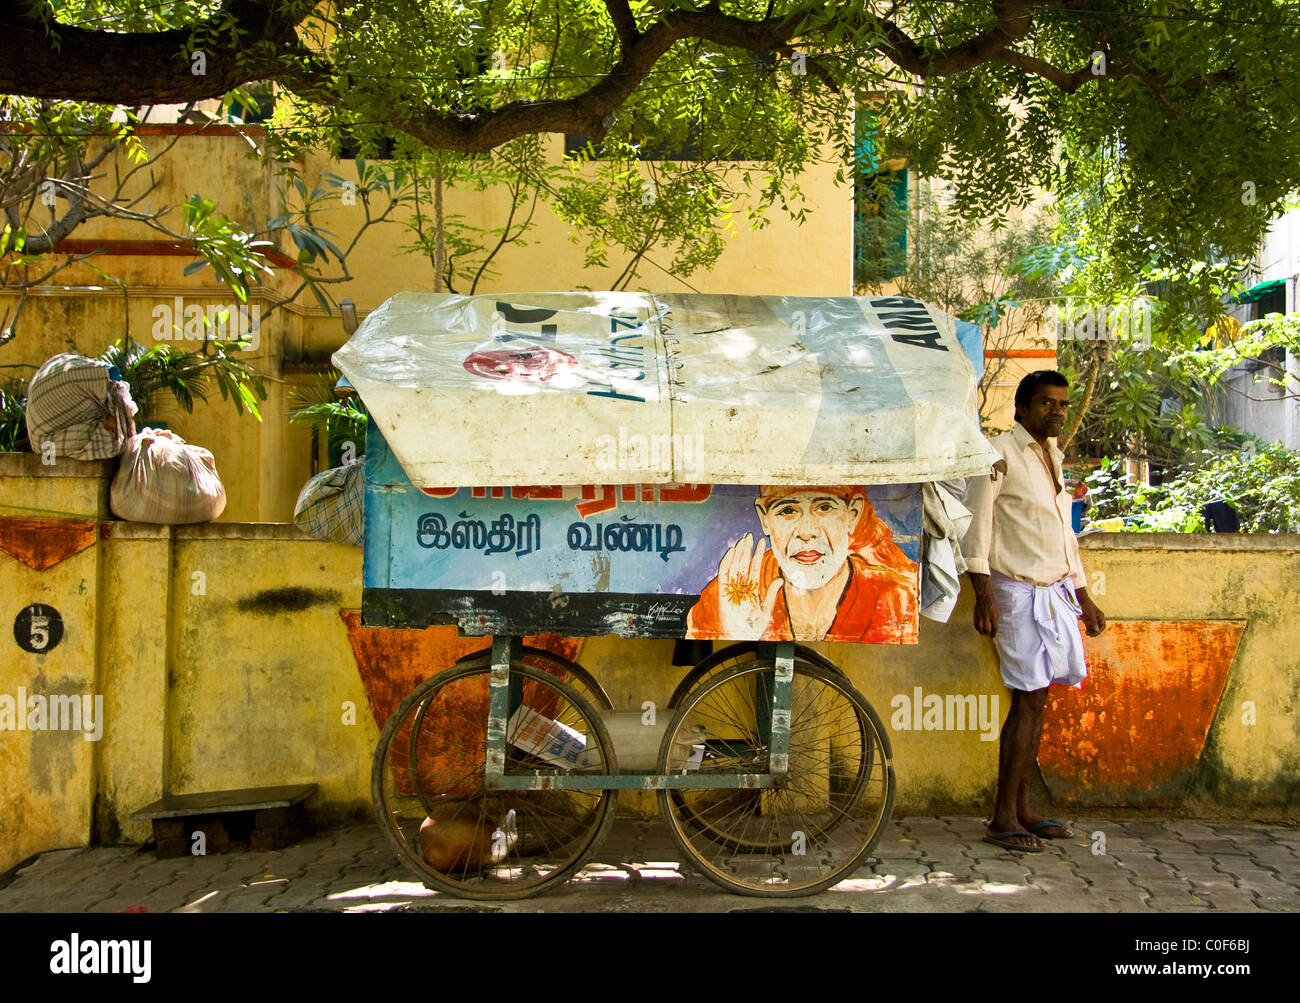 Indian ironing man with trolley under a tree. Stock Photo